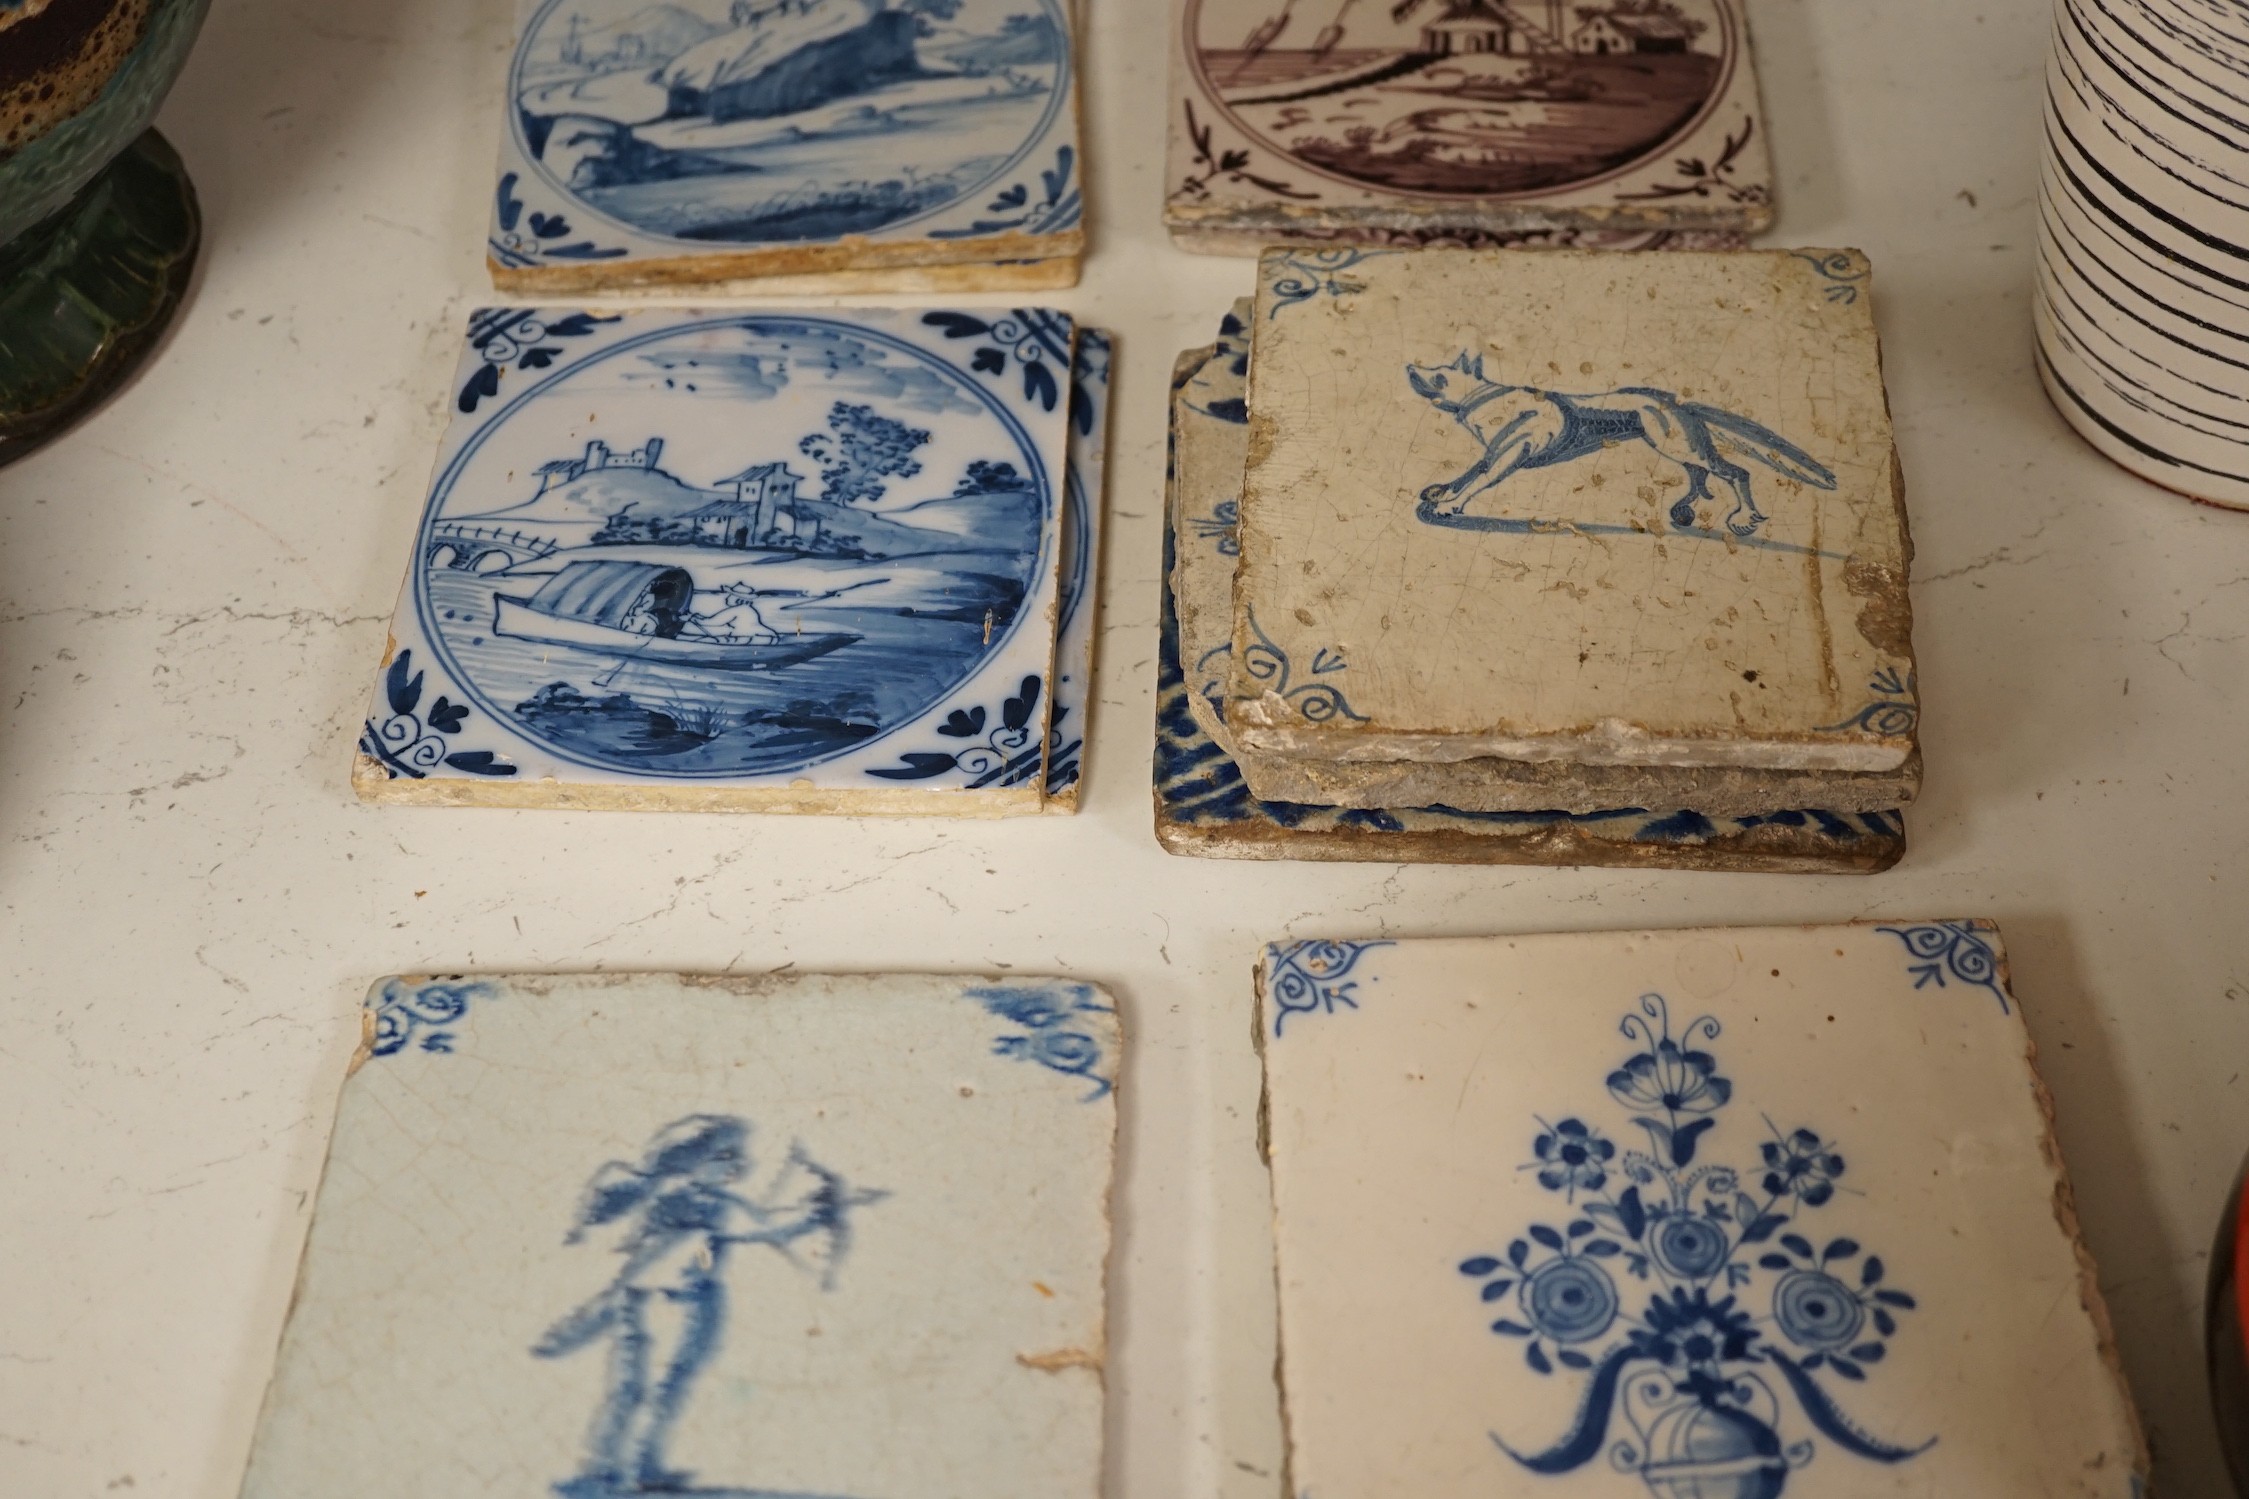 Sixteen Delft tiles from the 17th to 19th century